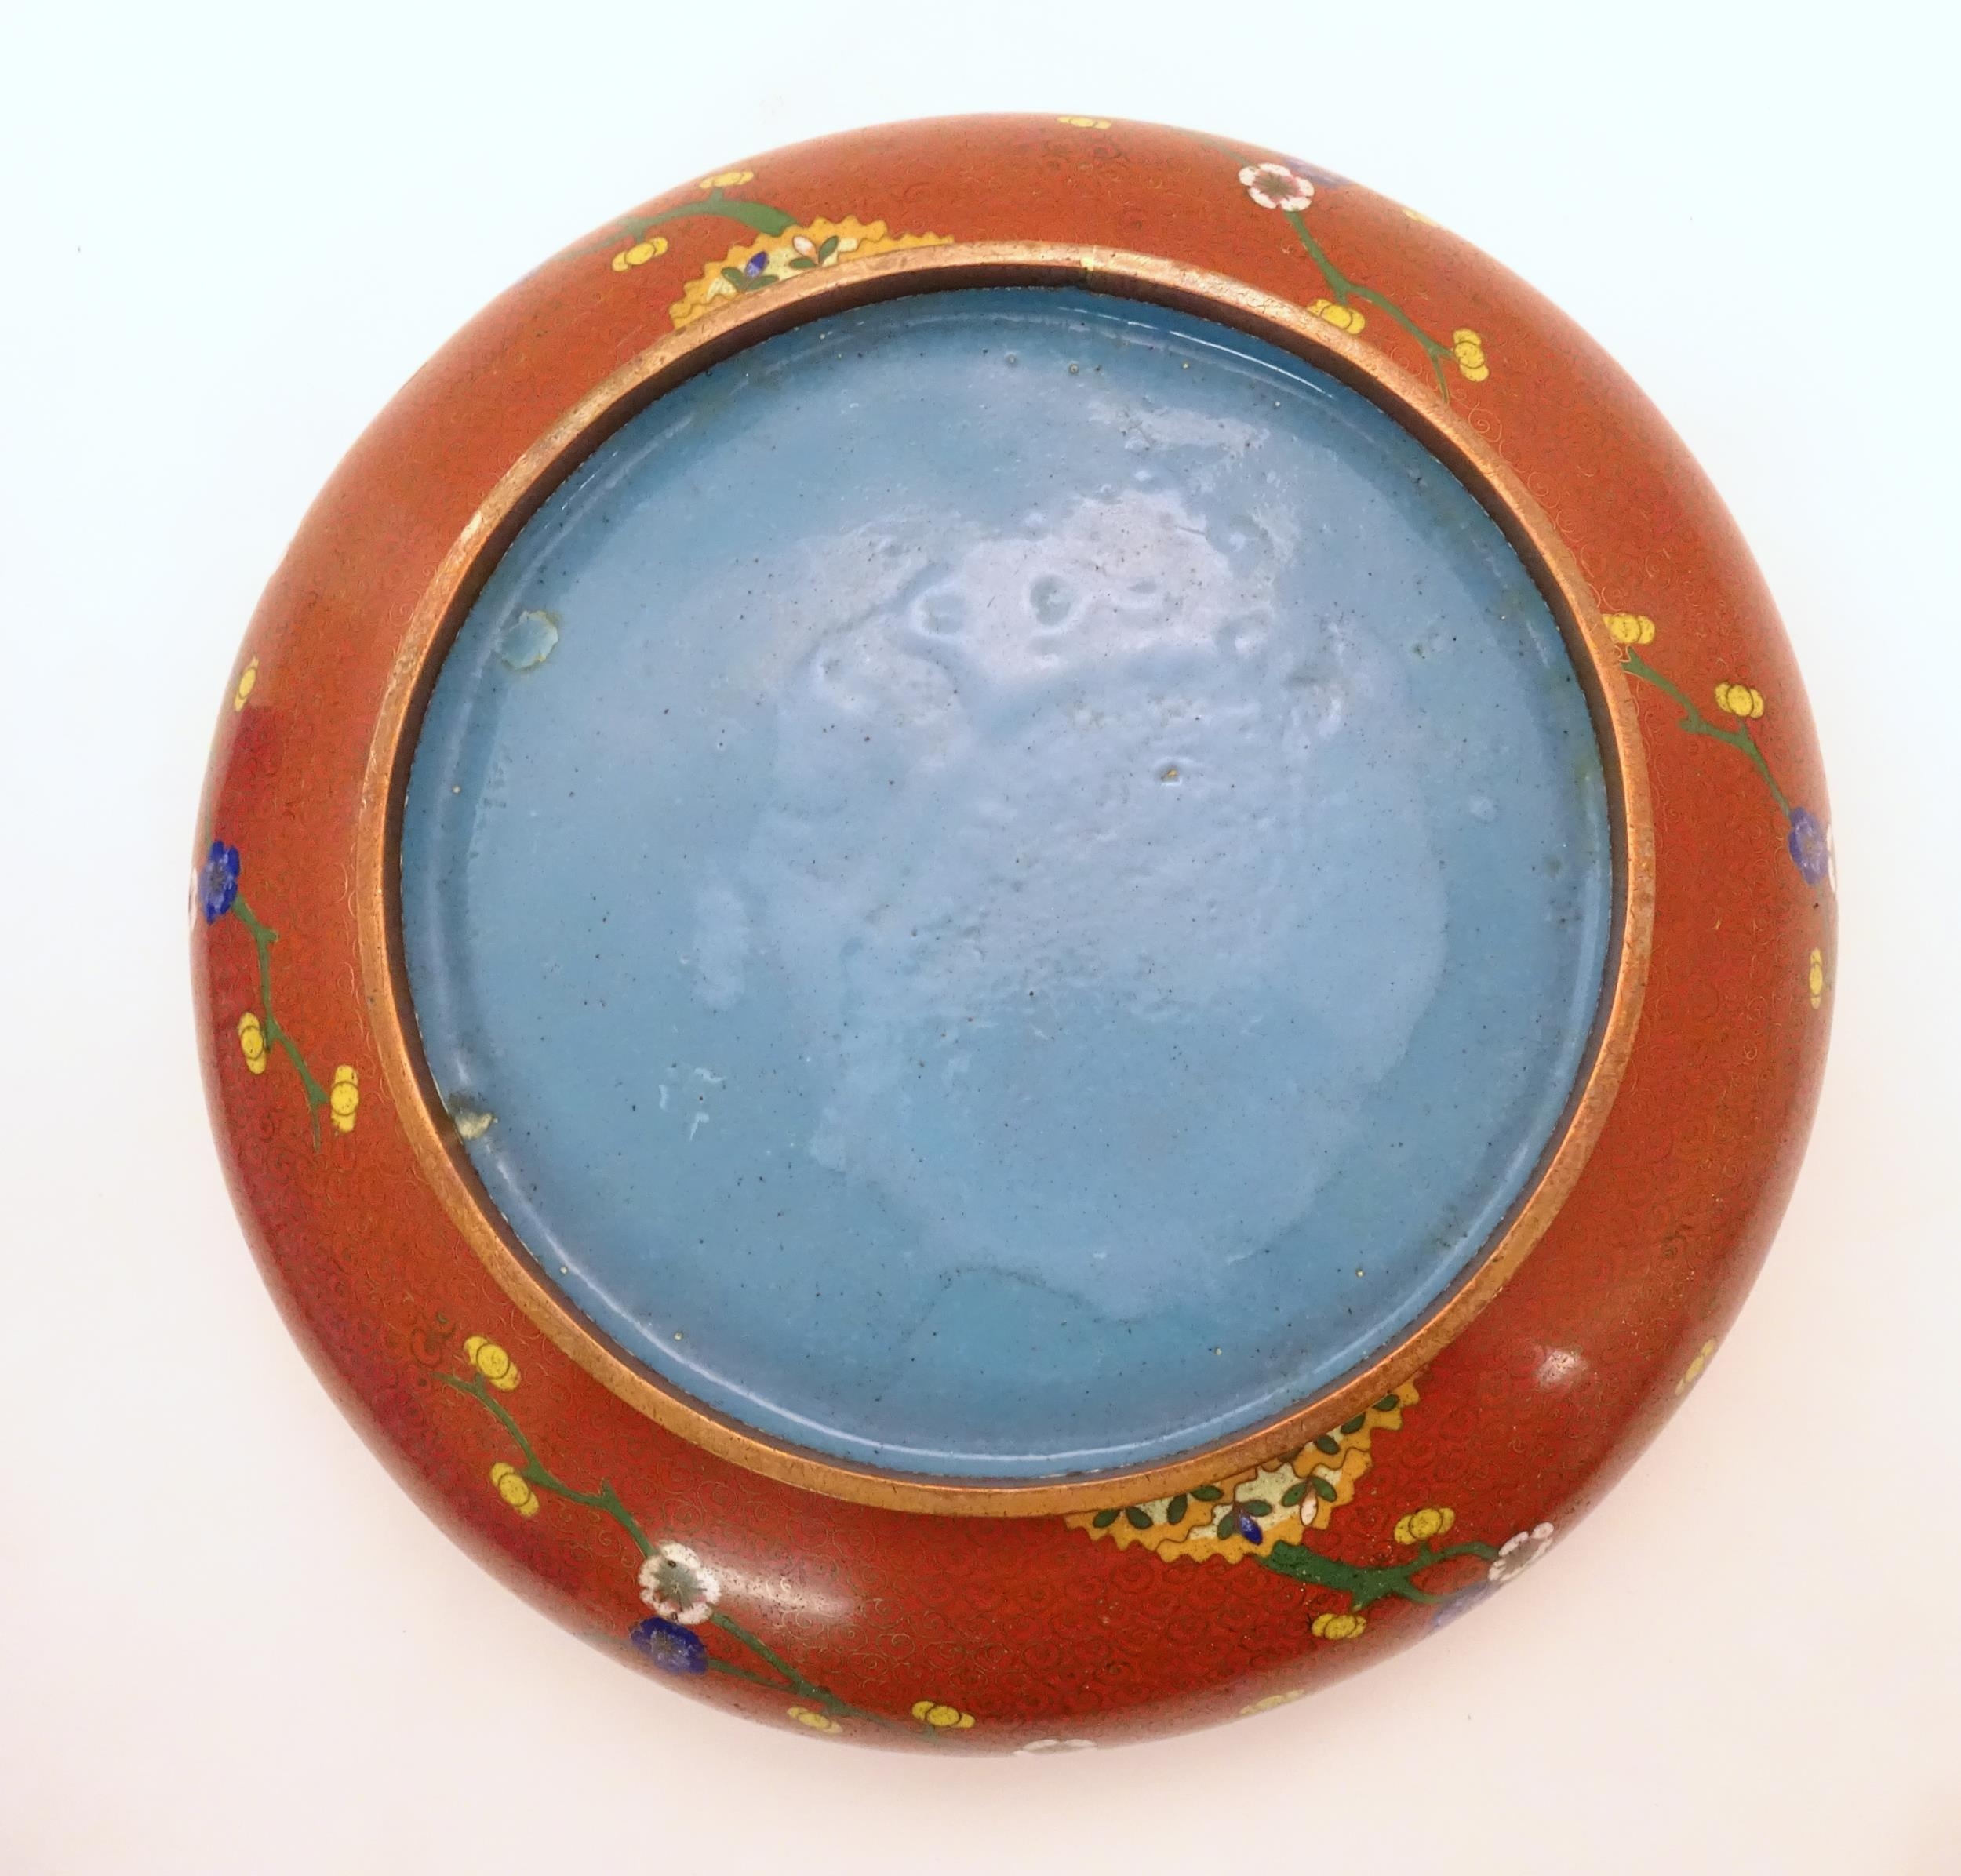 A Chinese cloisonne shallow bowl with floral and foliate detail. Approx. 3 1/4" x 10" diameter - Image 6 of 6